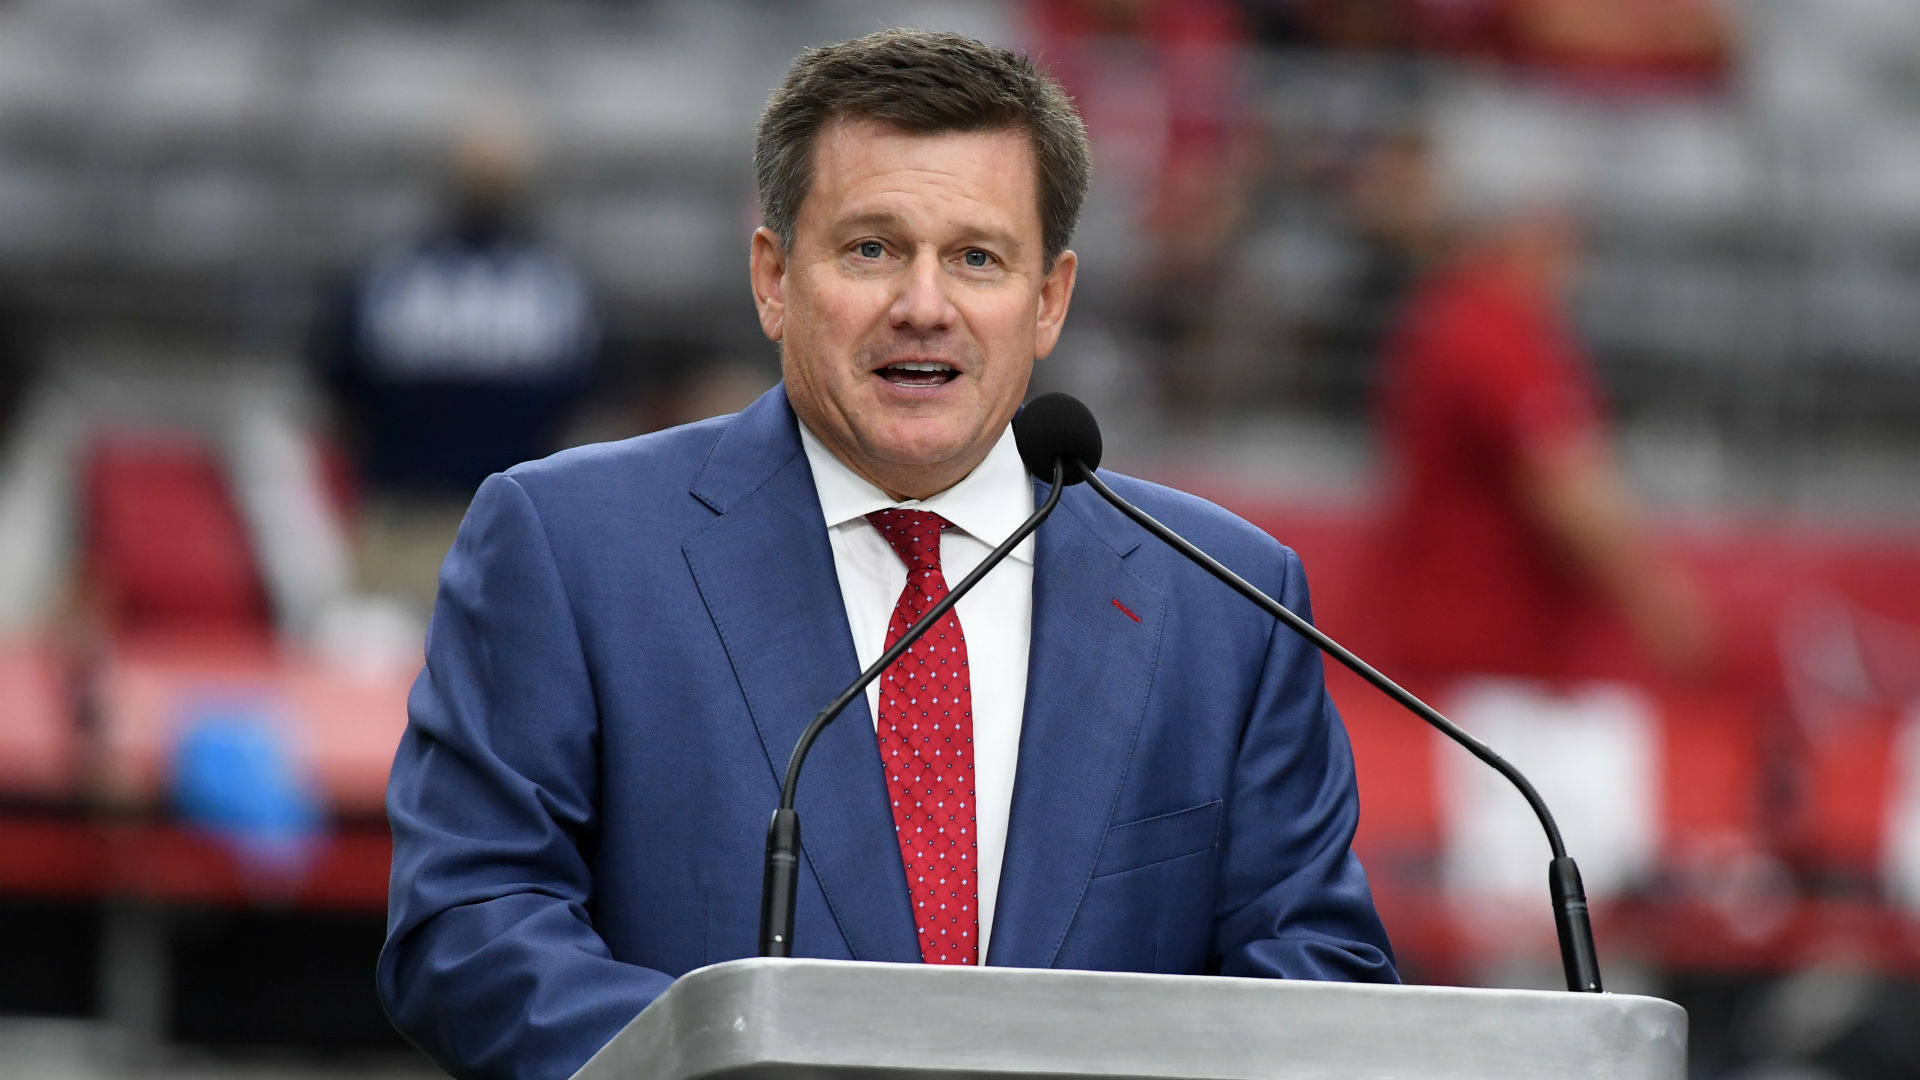 Michael Bidwill encouraged everyone to continue practicing important measures against COVID-19 after the Cardinals owner left hospital.